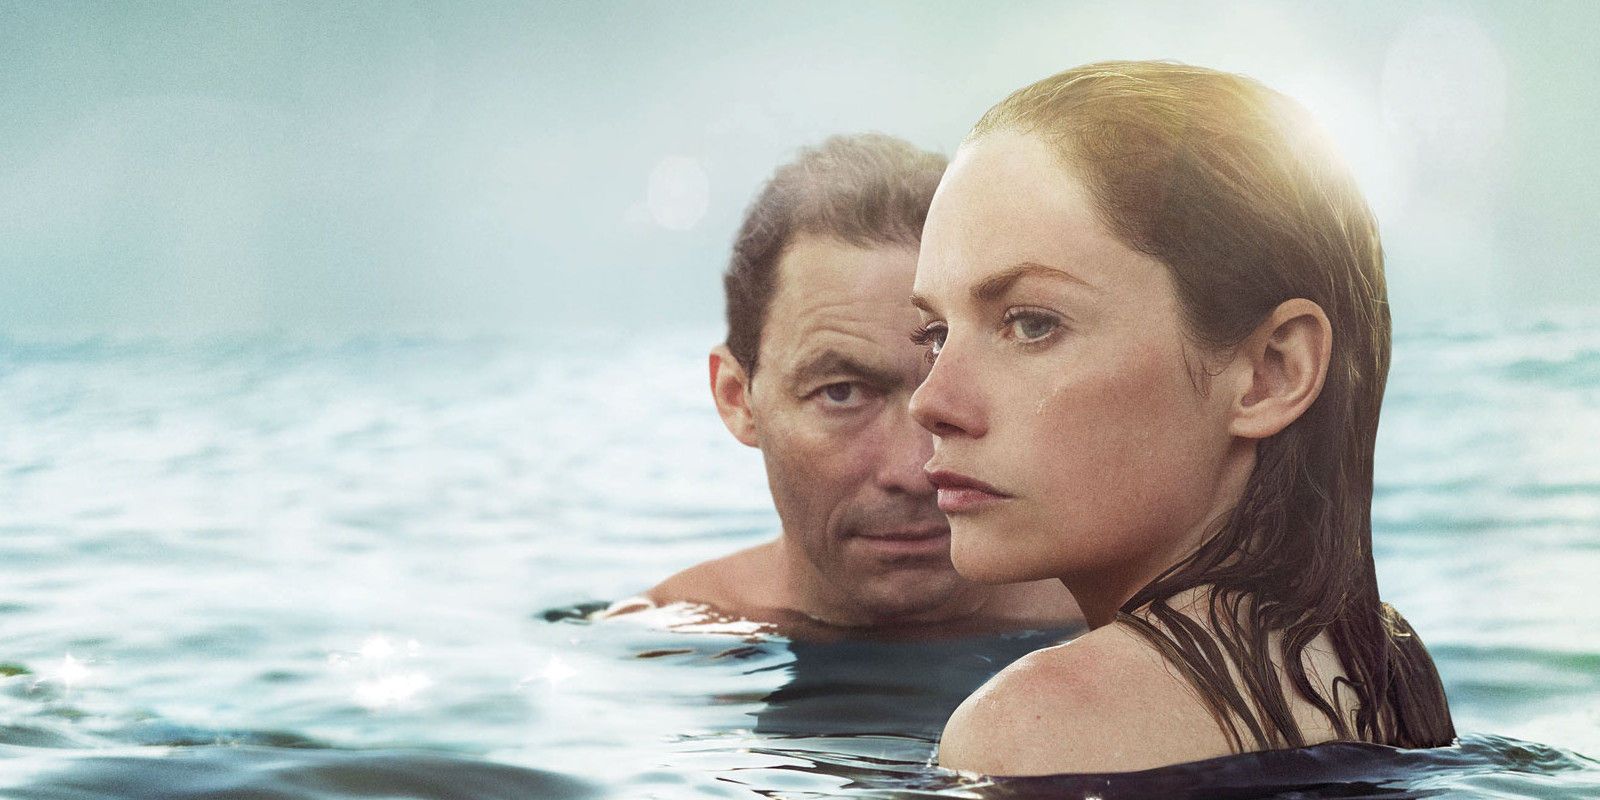 Noah Solloway (Dominic West) and Alison Bailey (Ruth Wilson) in the ocean together in a post for The Affair